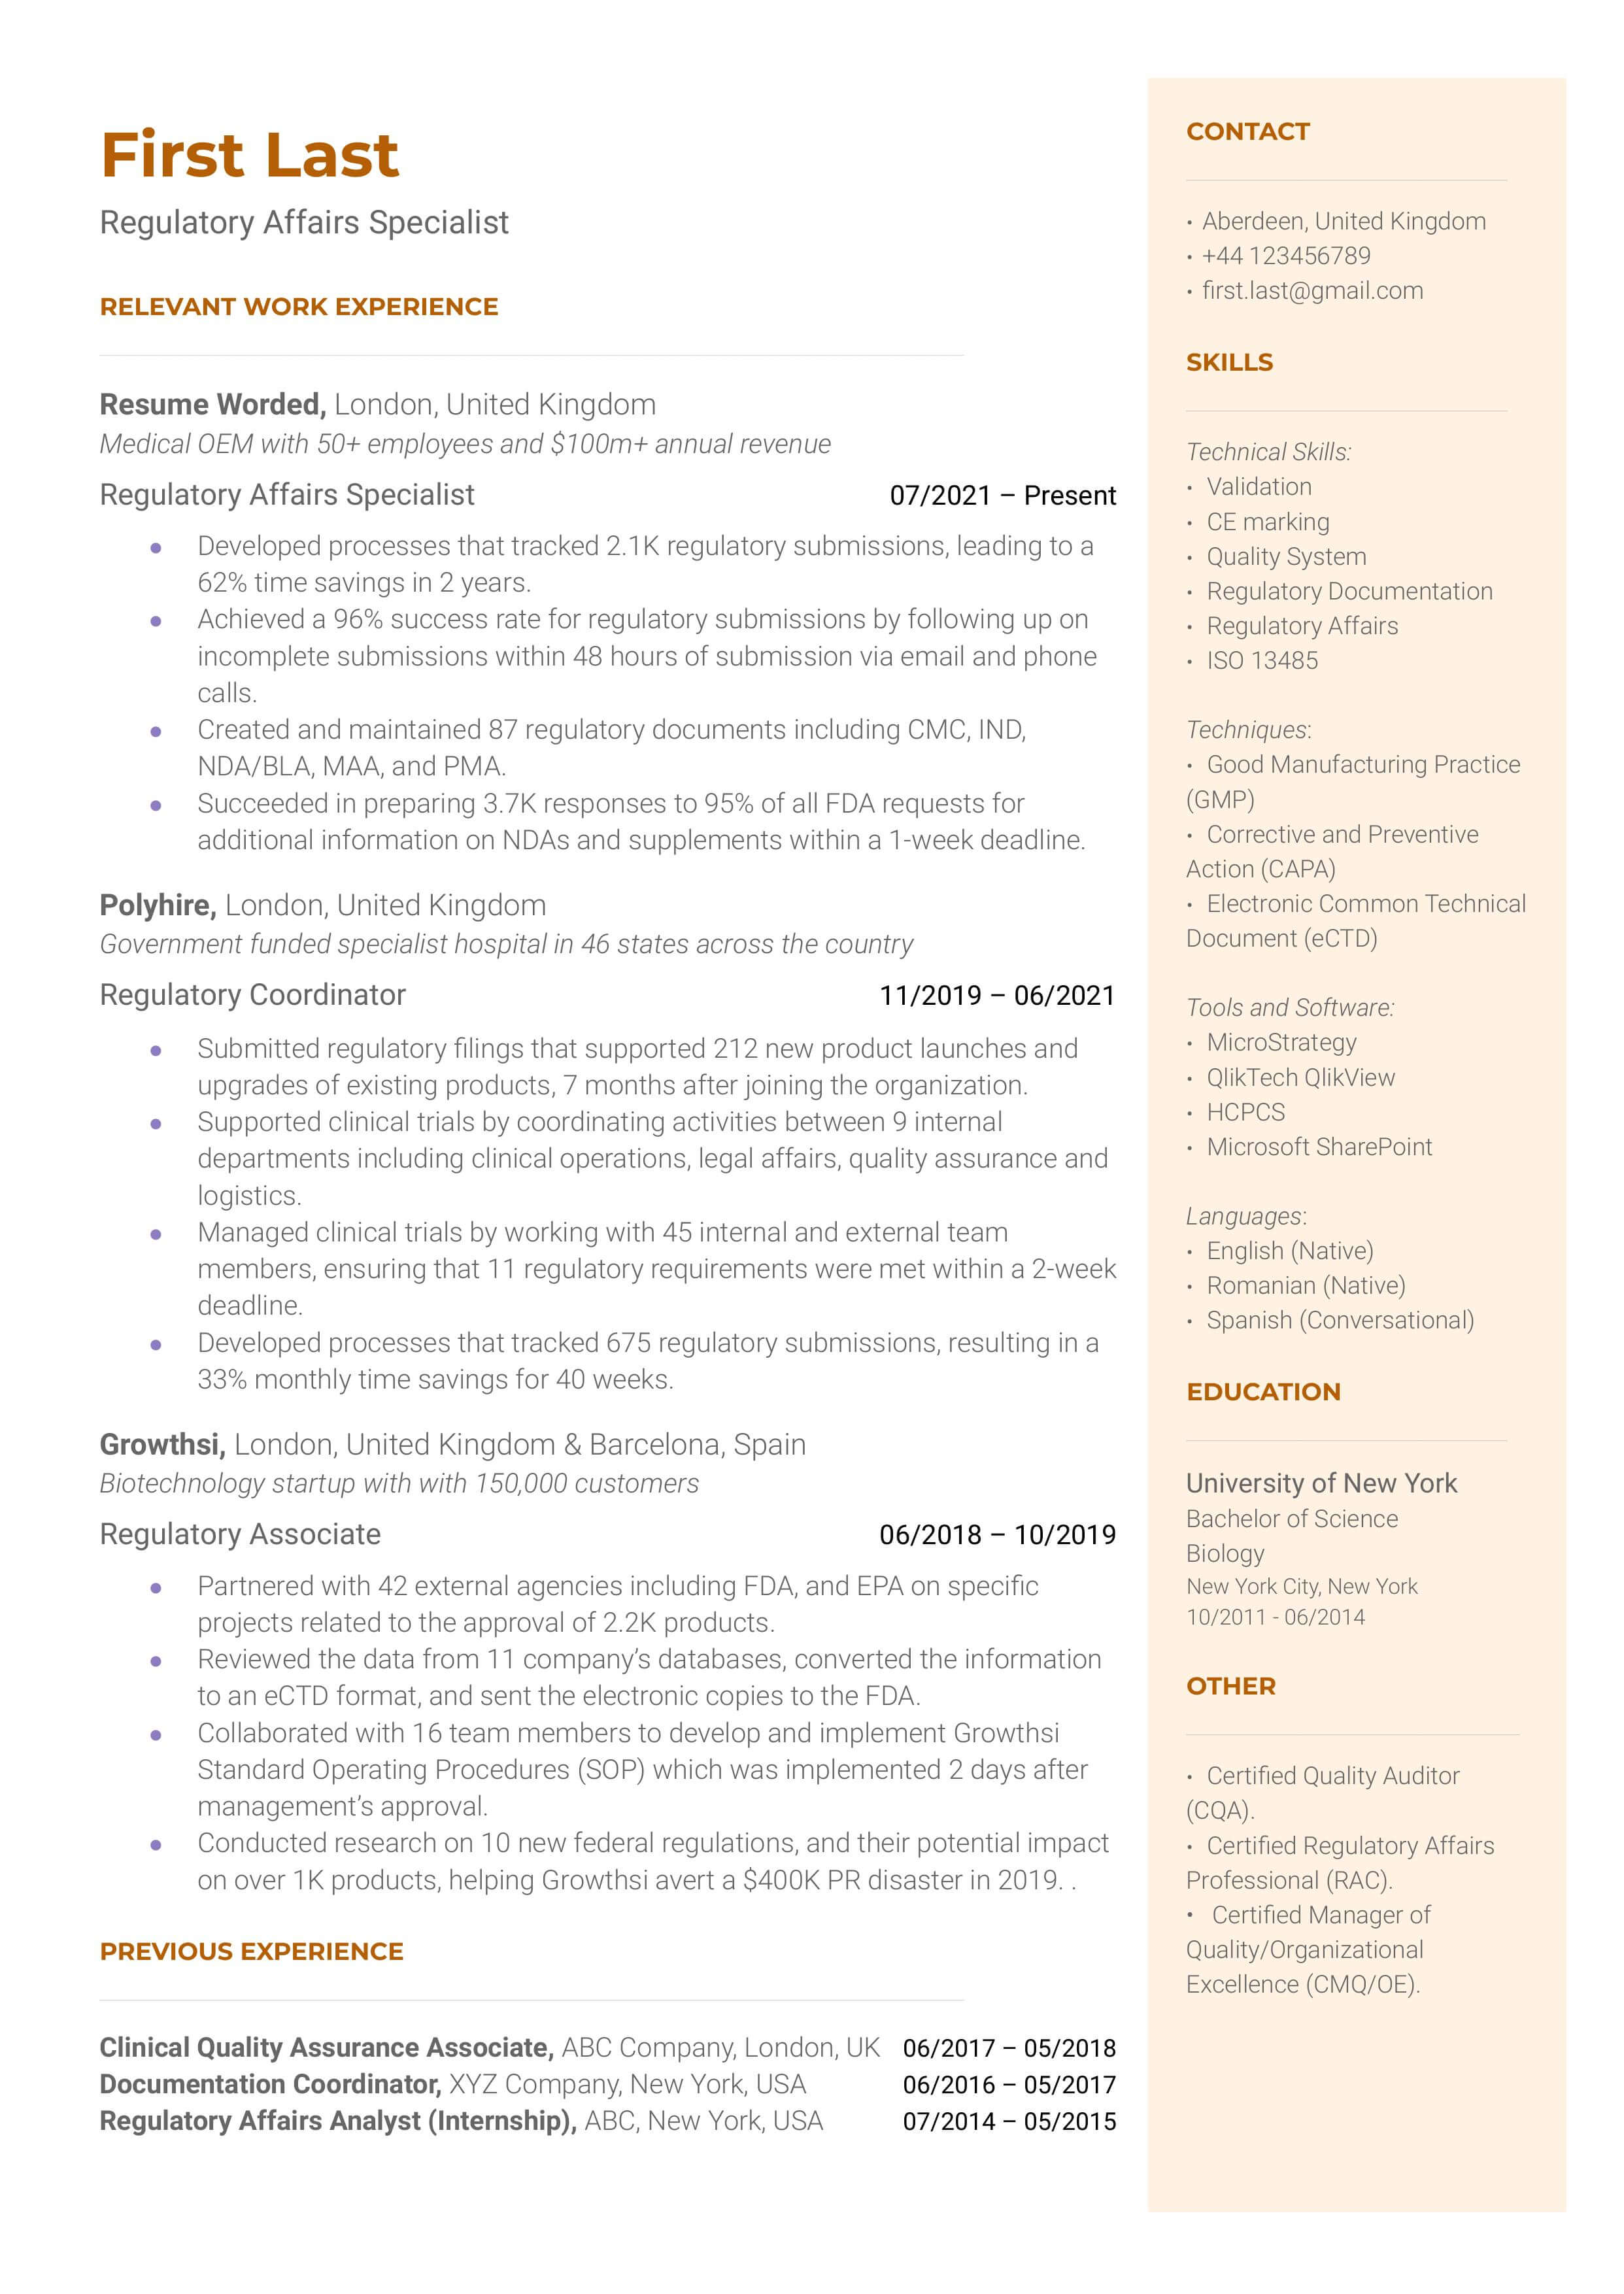 A regulatory affairs specialist resume template including relevant work history, skills, and contact info